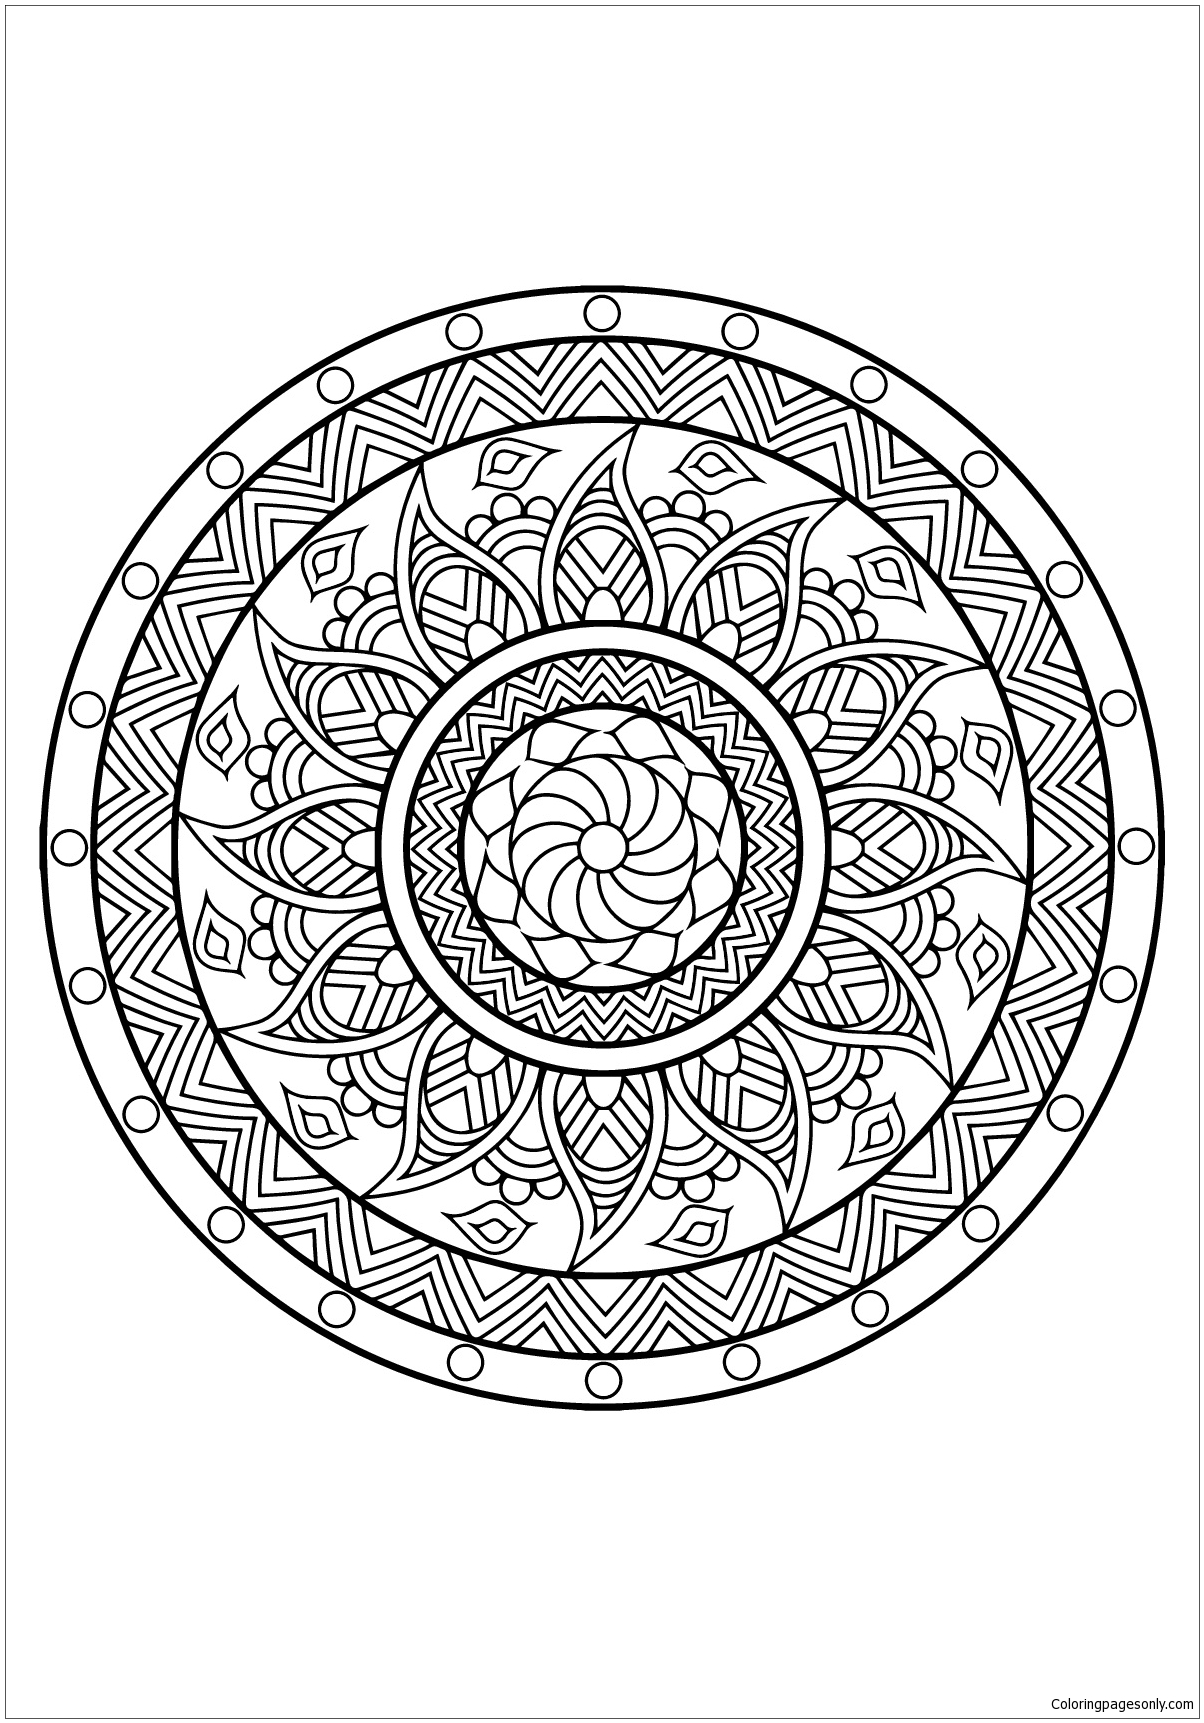 Mandala For Adults 2 Coloring Pages